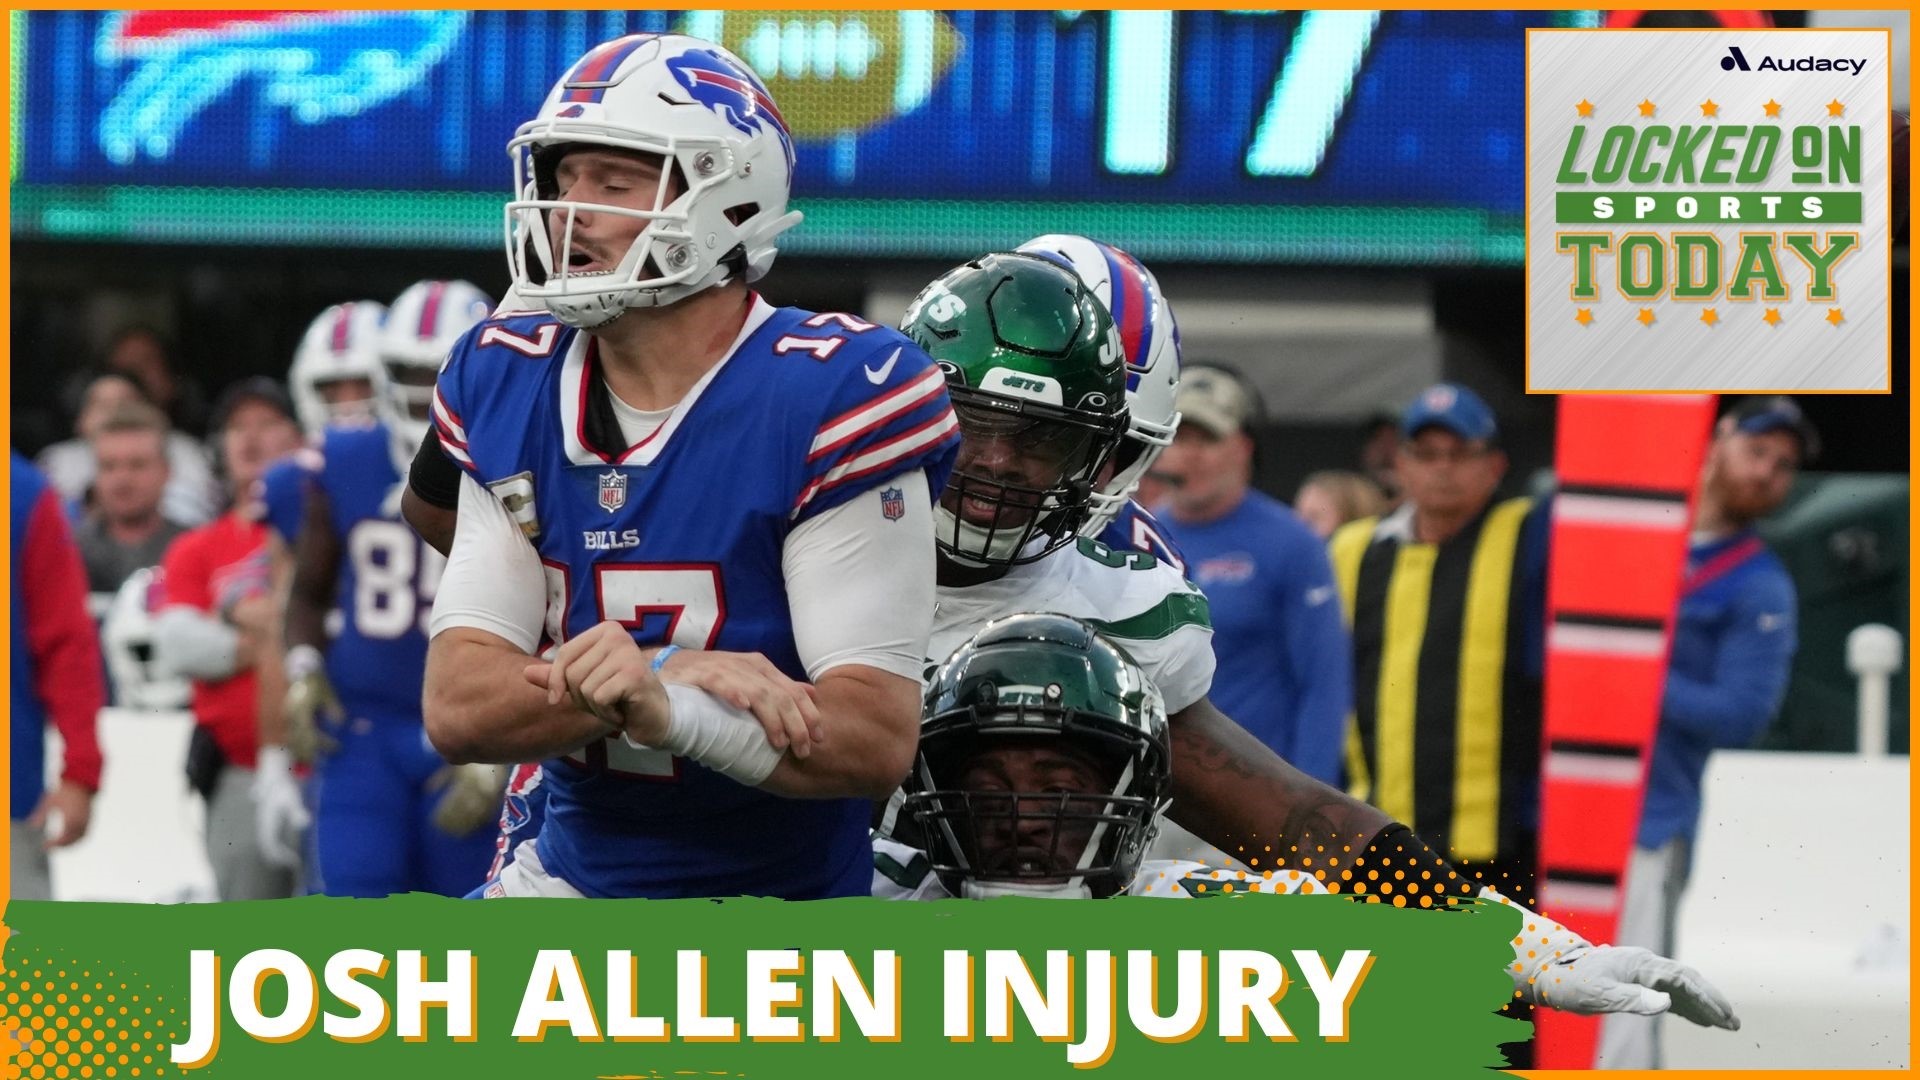 Discussing the day's top sports stories from Josh Allen's injury to the Nets pick for a new head coach and is Jalen Hurts the best pick for MVP in the NFL right now?